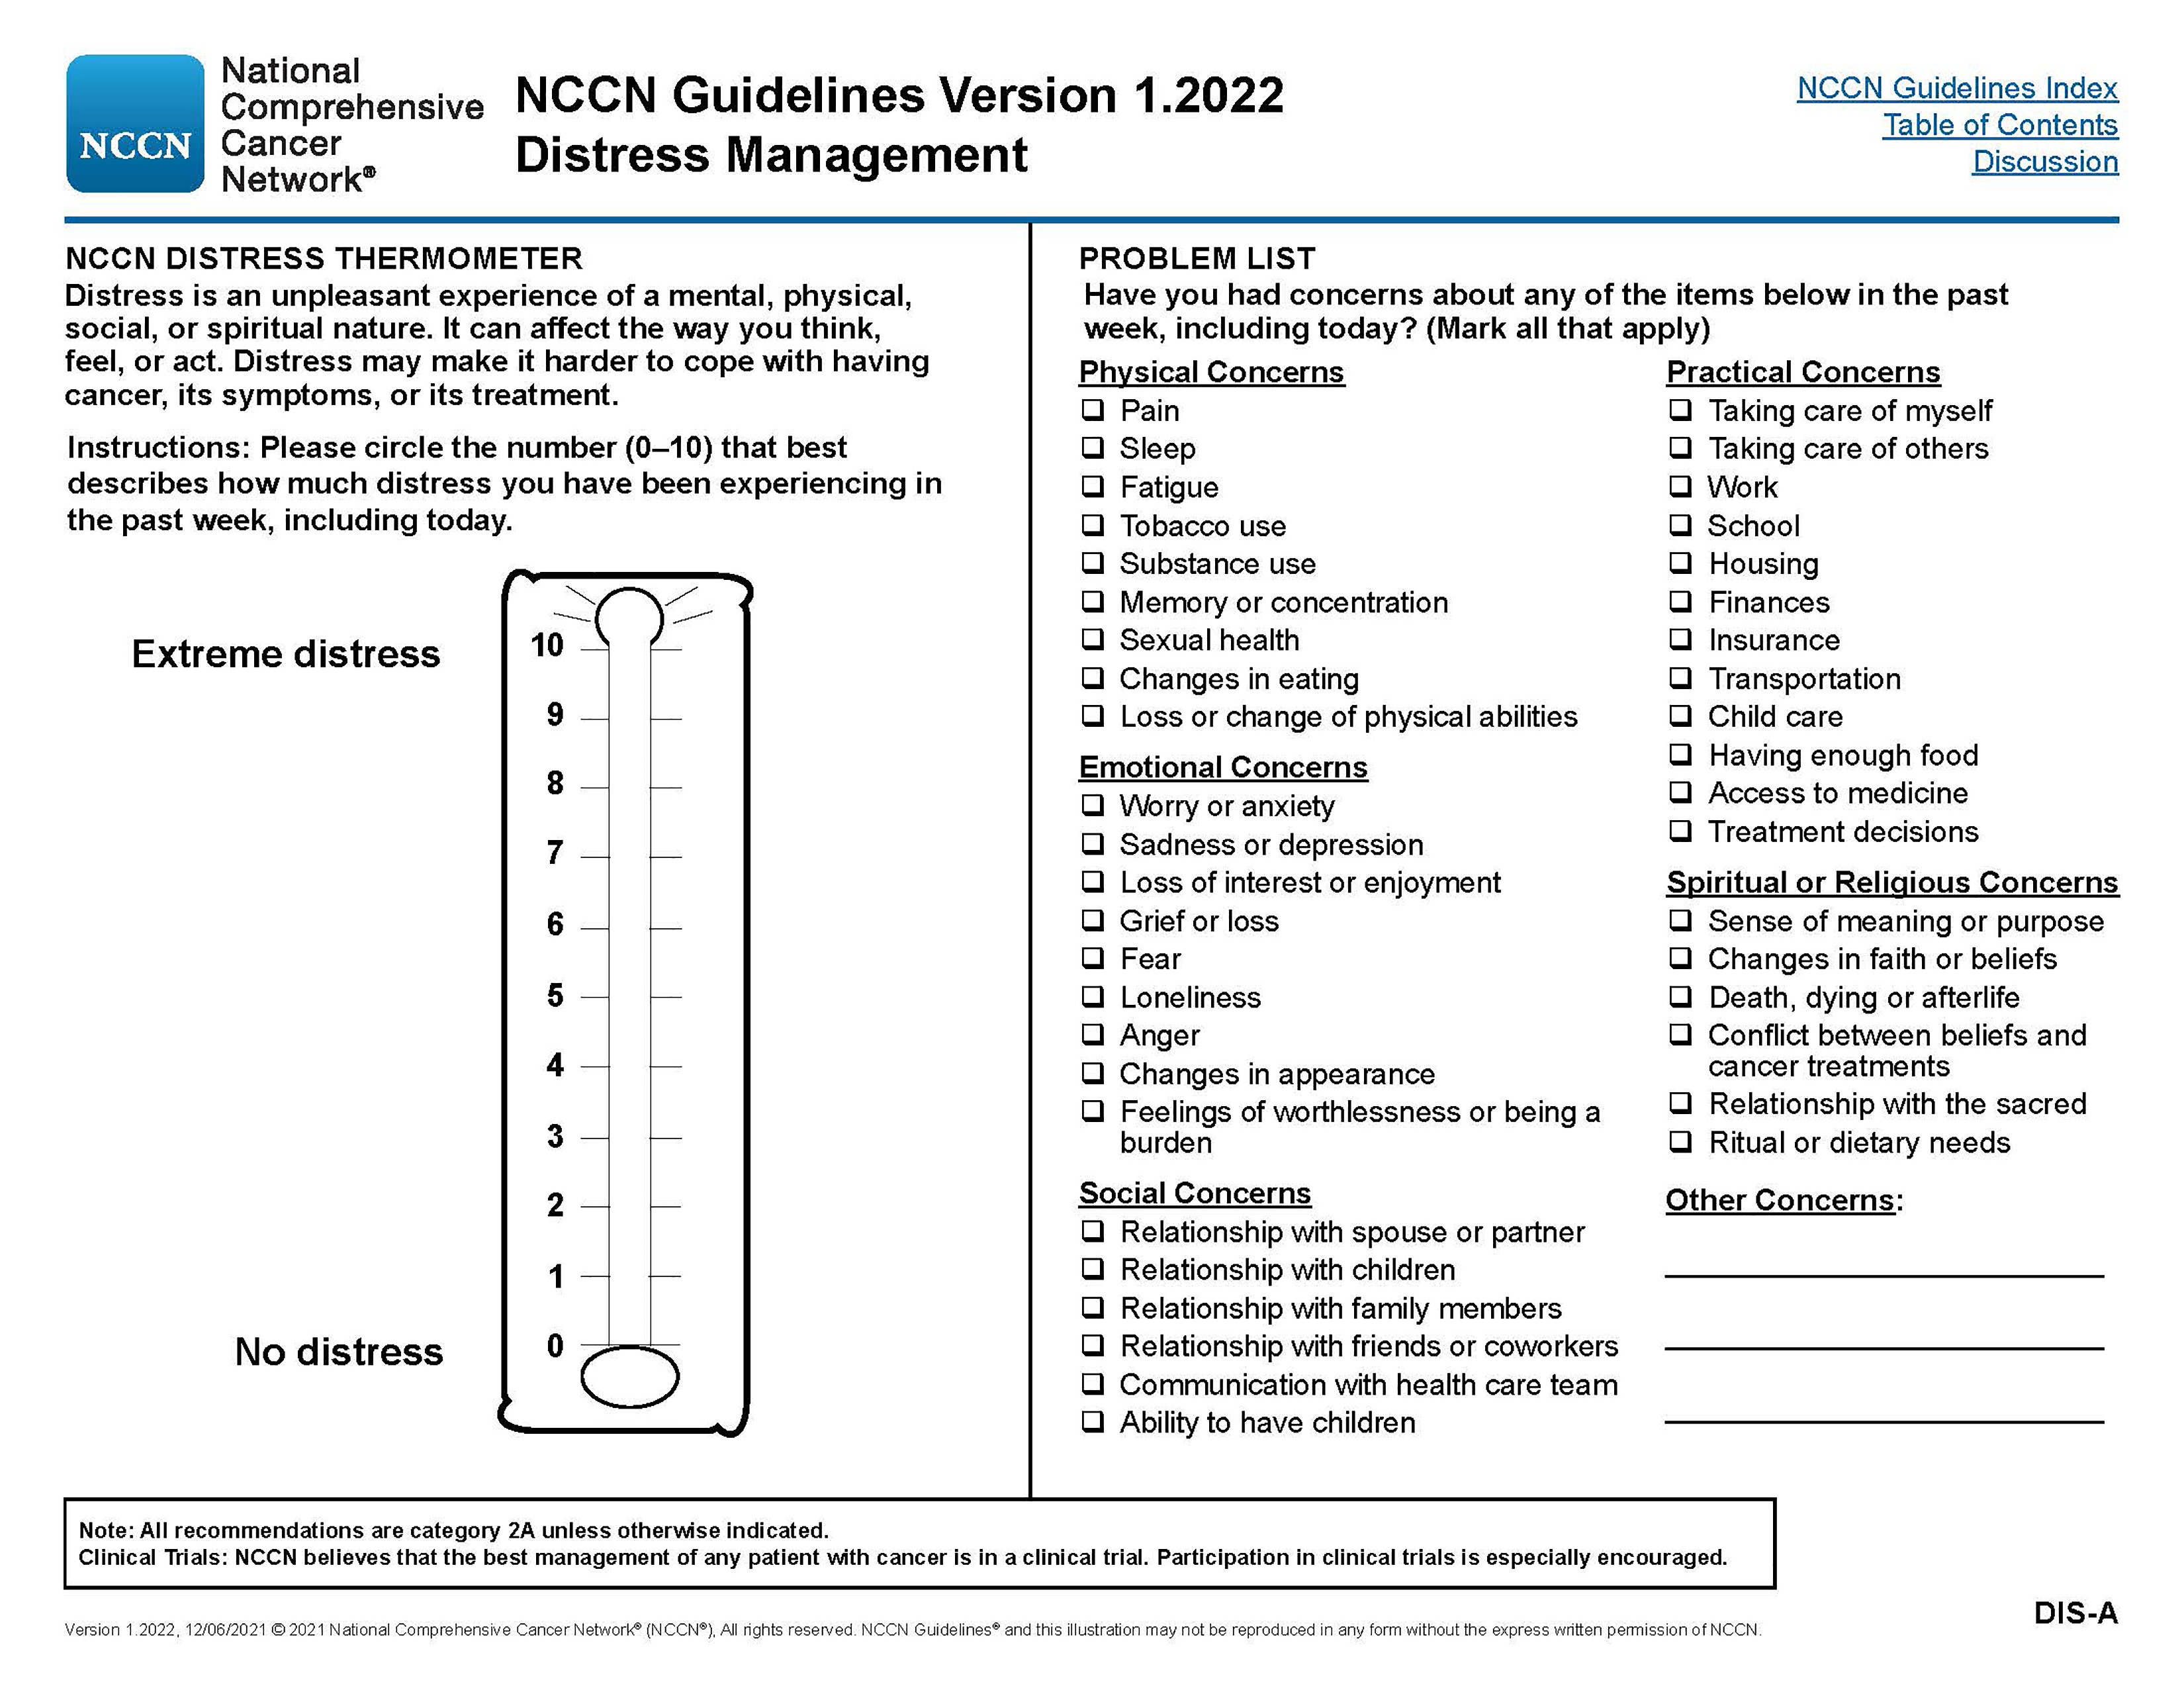 NCCN Distress Thermometer and Problem List